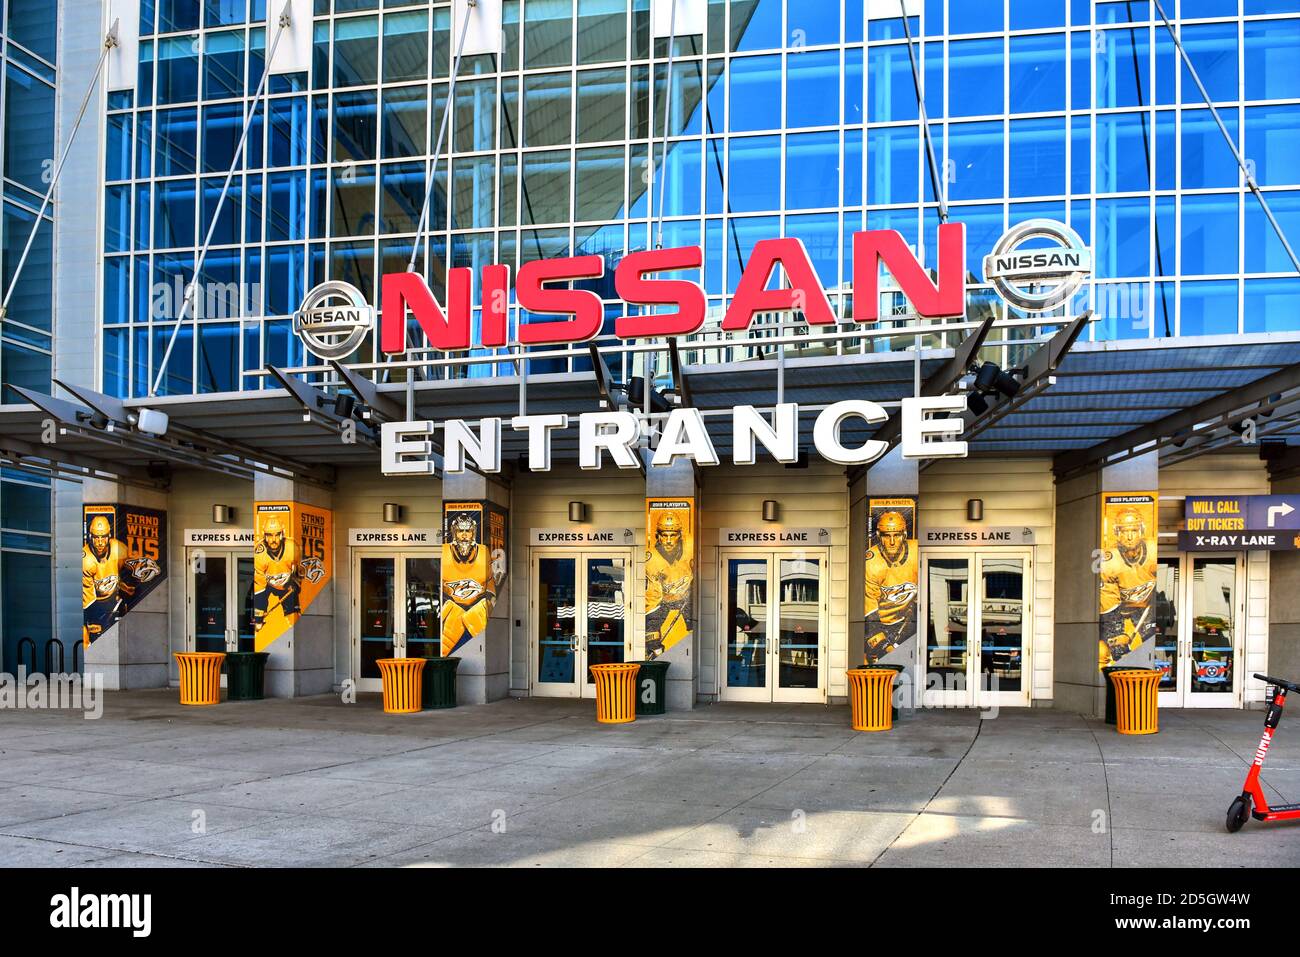 Nashville, TN, USA - September 21, 2019: The Bridgestone Arena has been home to the Nashville Predators of the NHL since 1998. It is located on Broadw Stock Photo